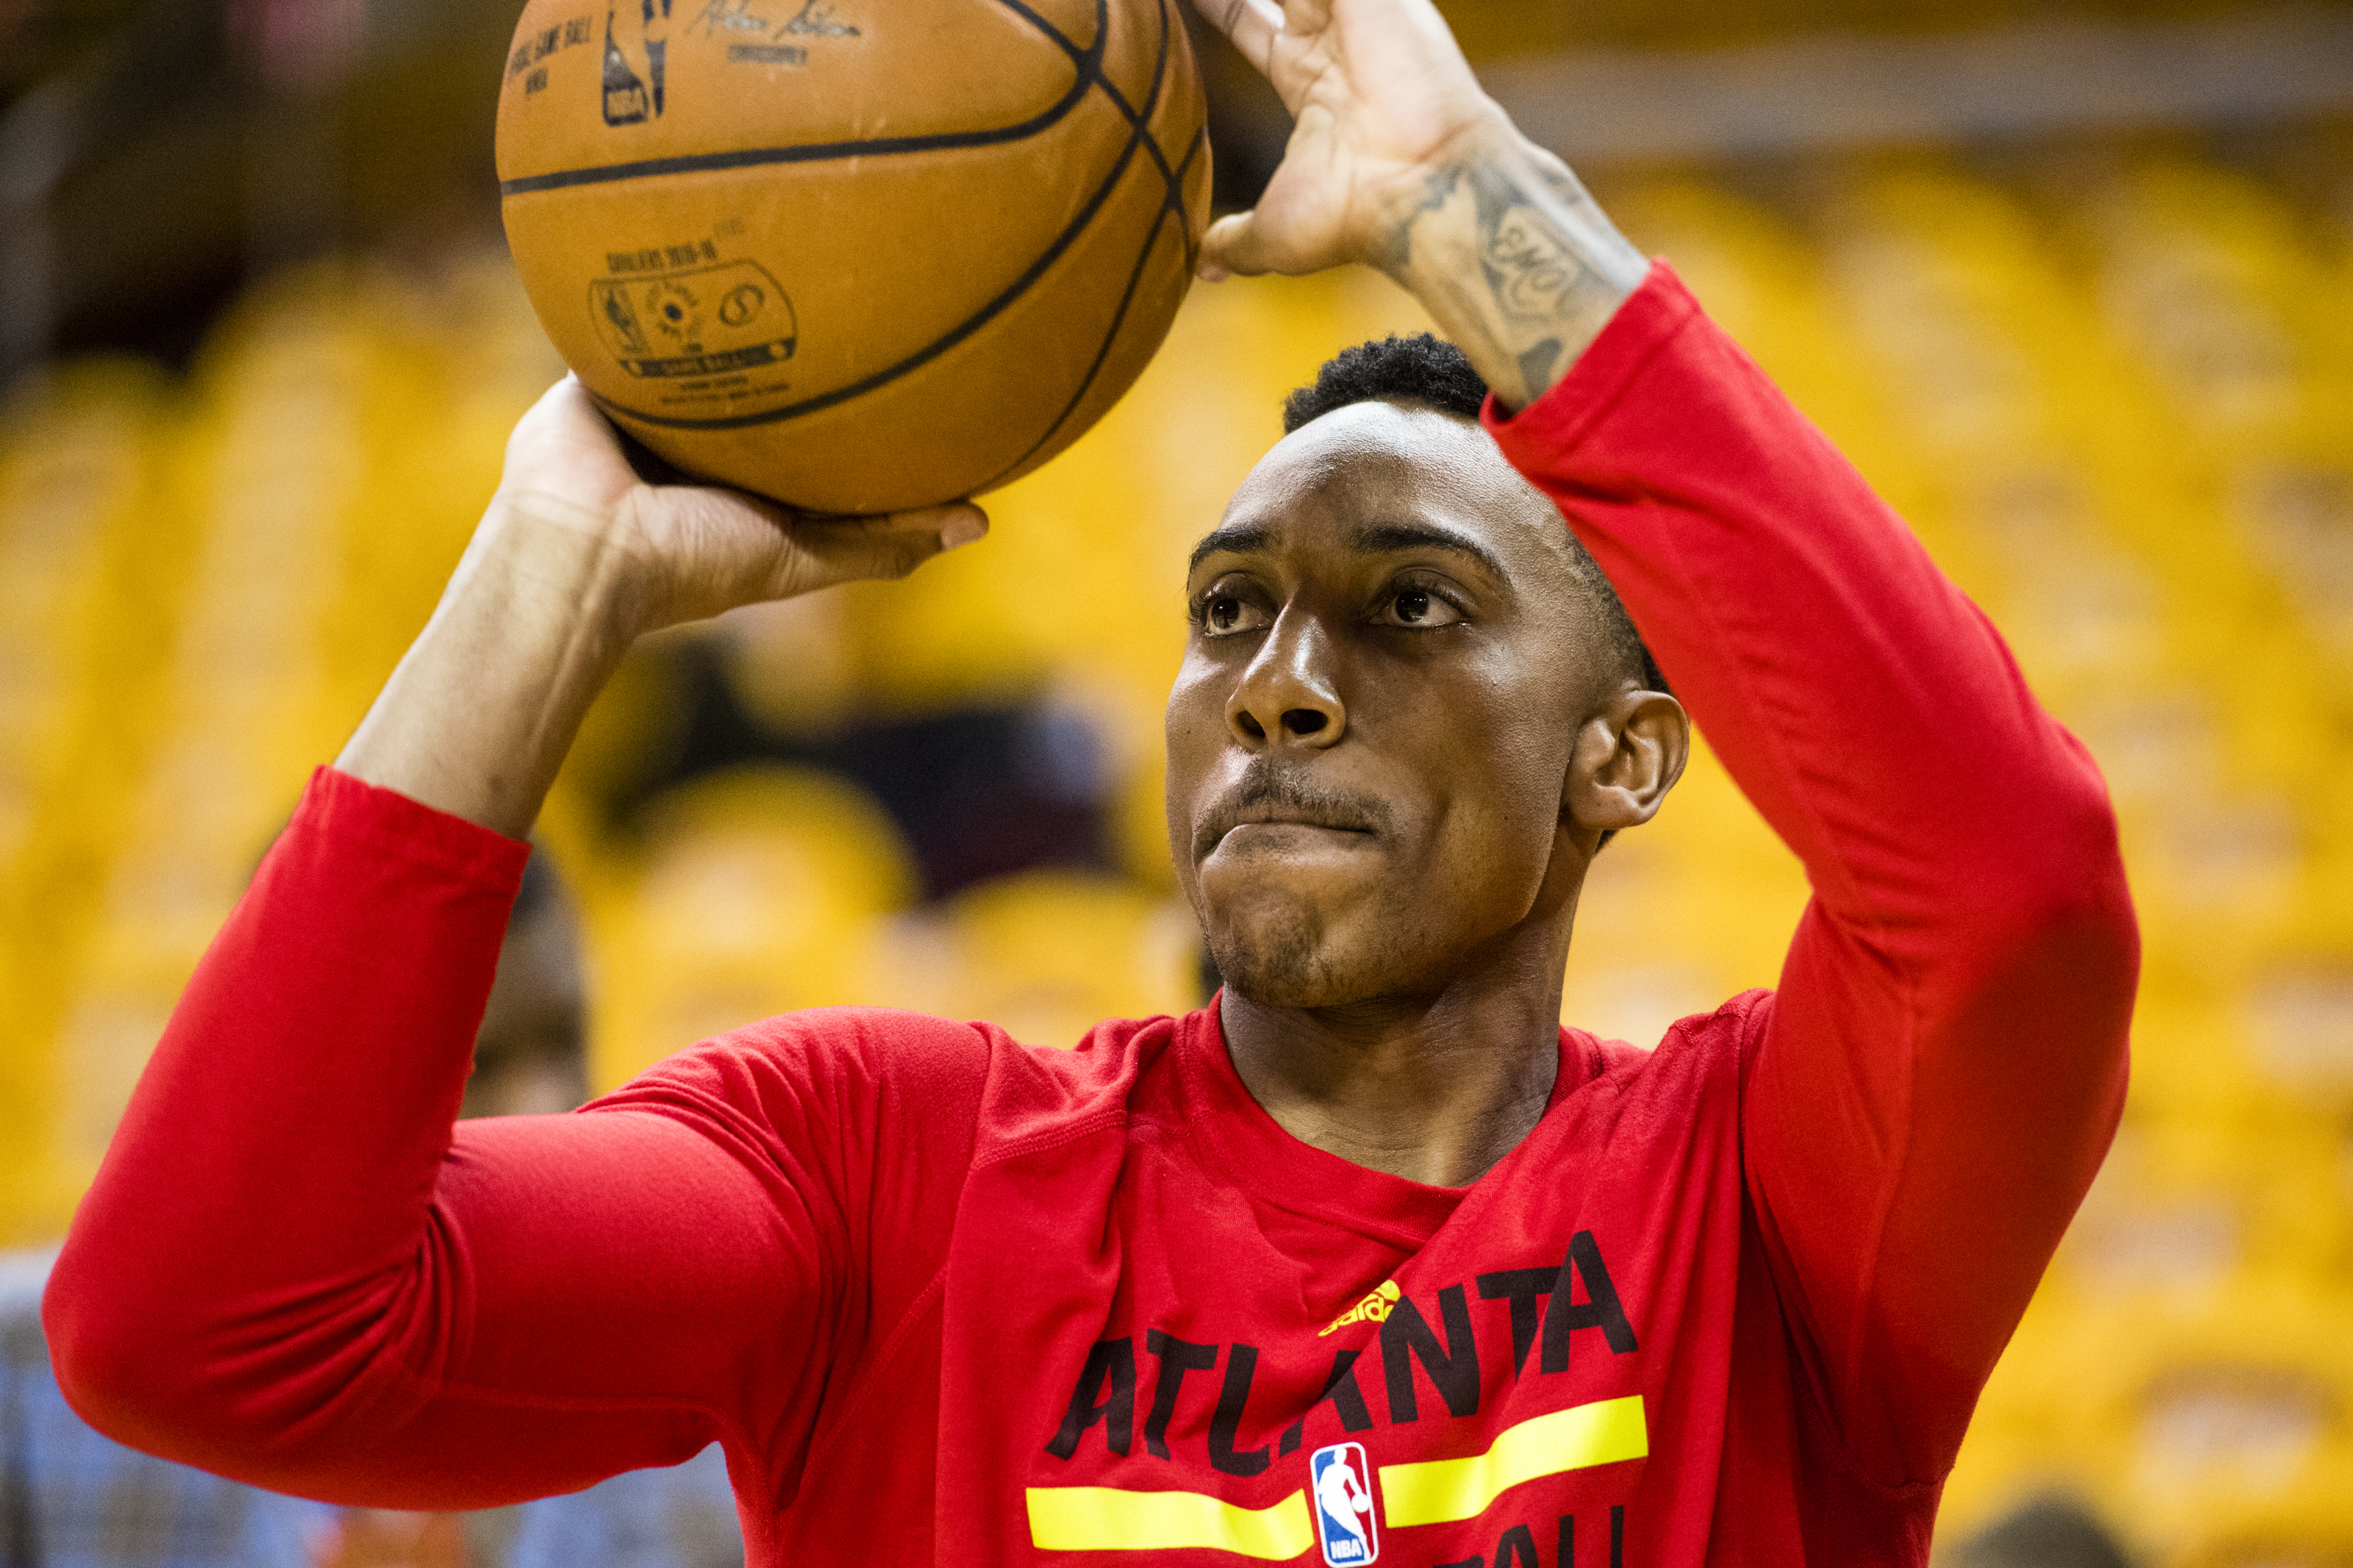 Jeff Teague Trade Rumors: Latest News and Speculation on Hawks PG